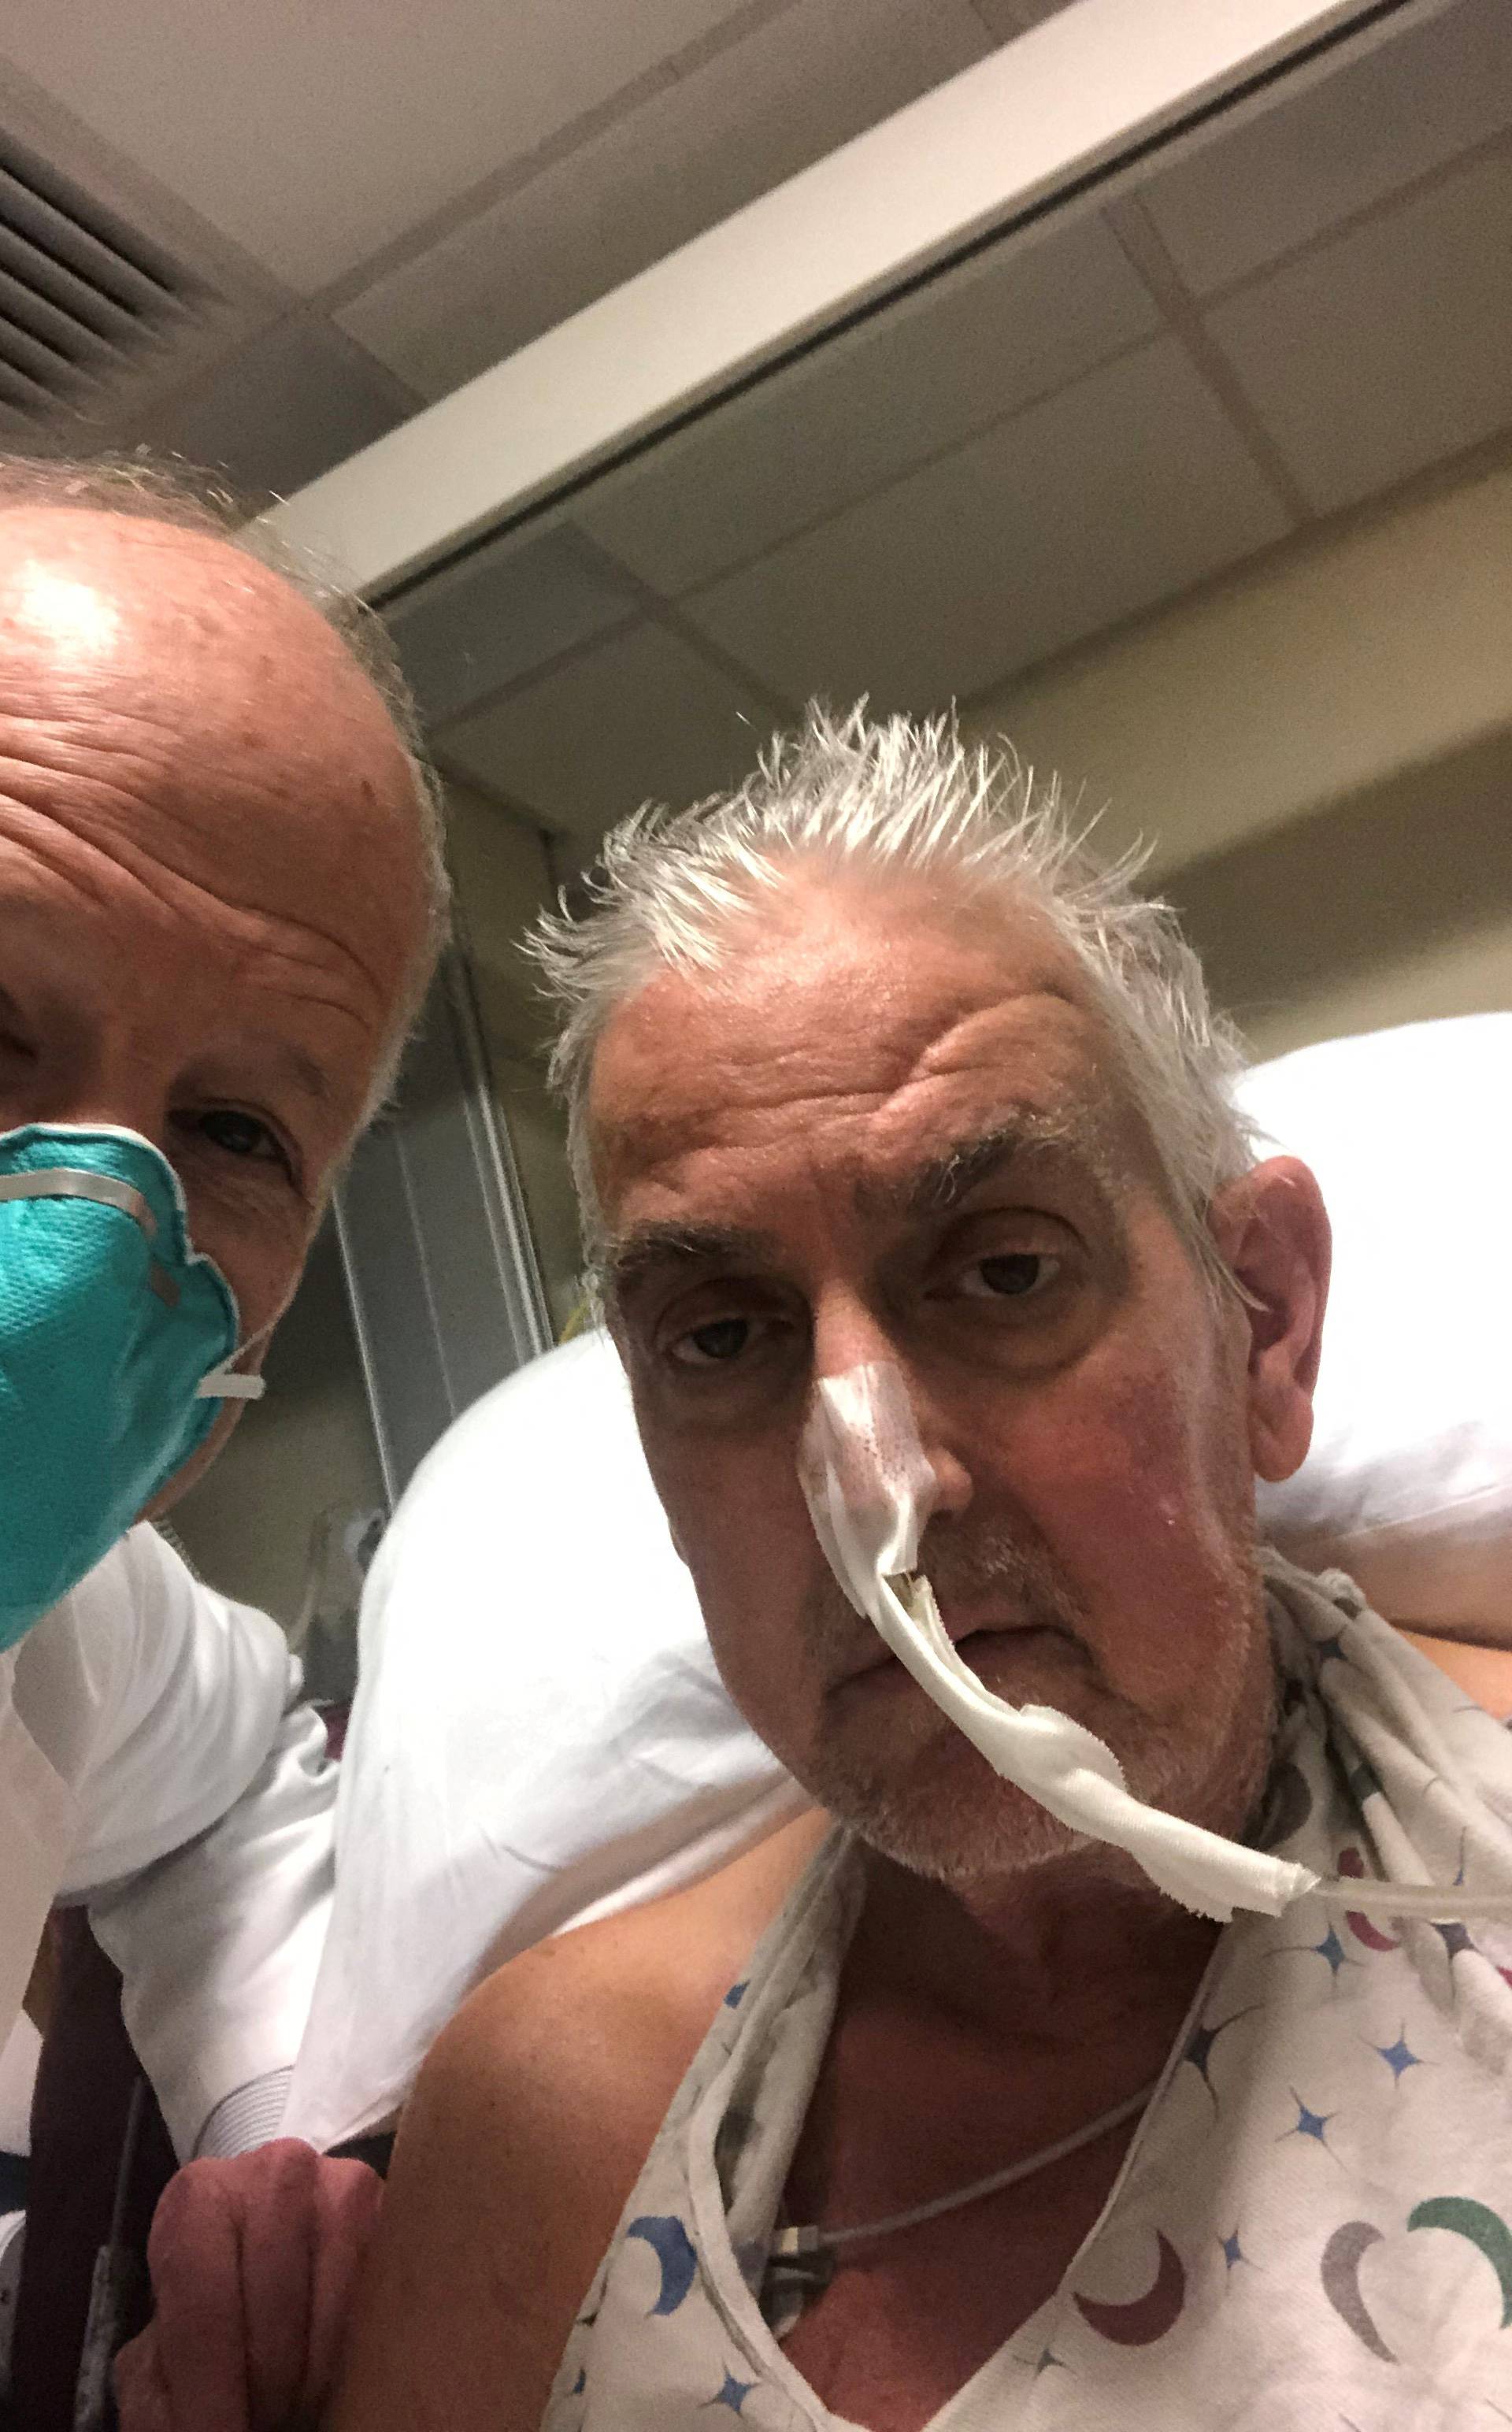 David Bennett poses with surgeon before pig heart transplant in Baltimore